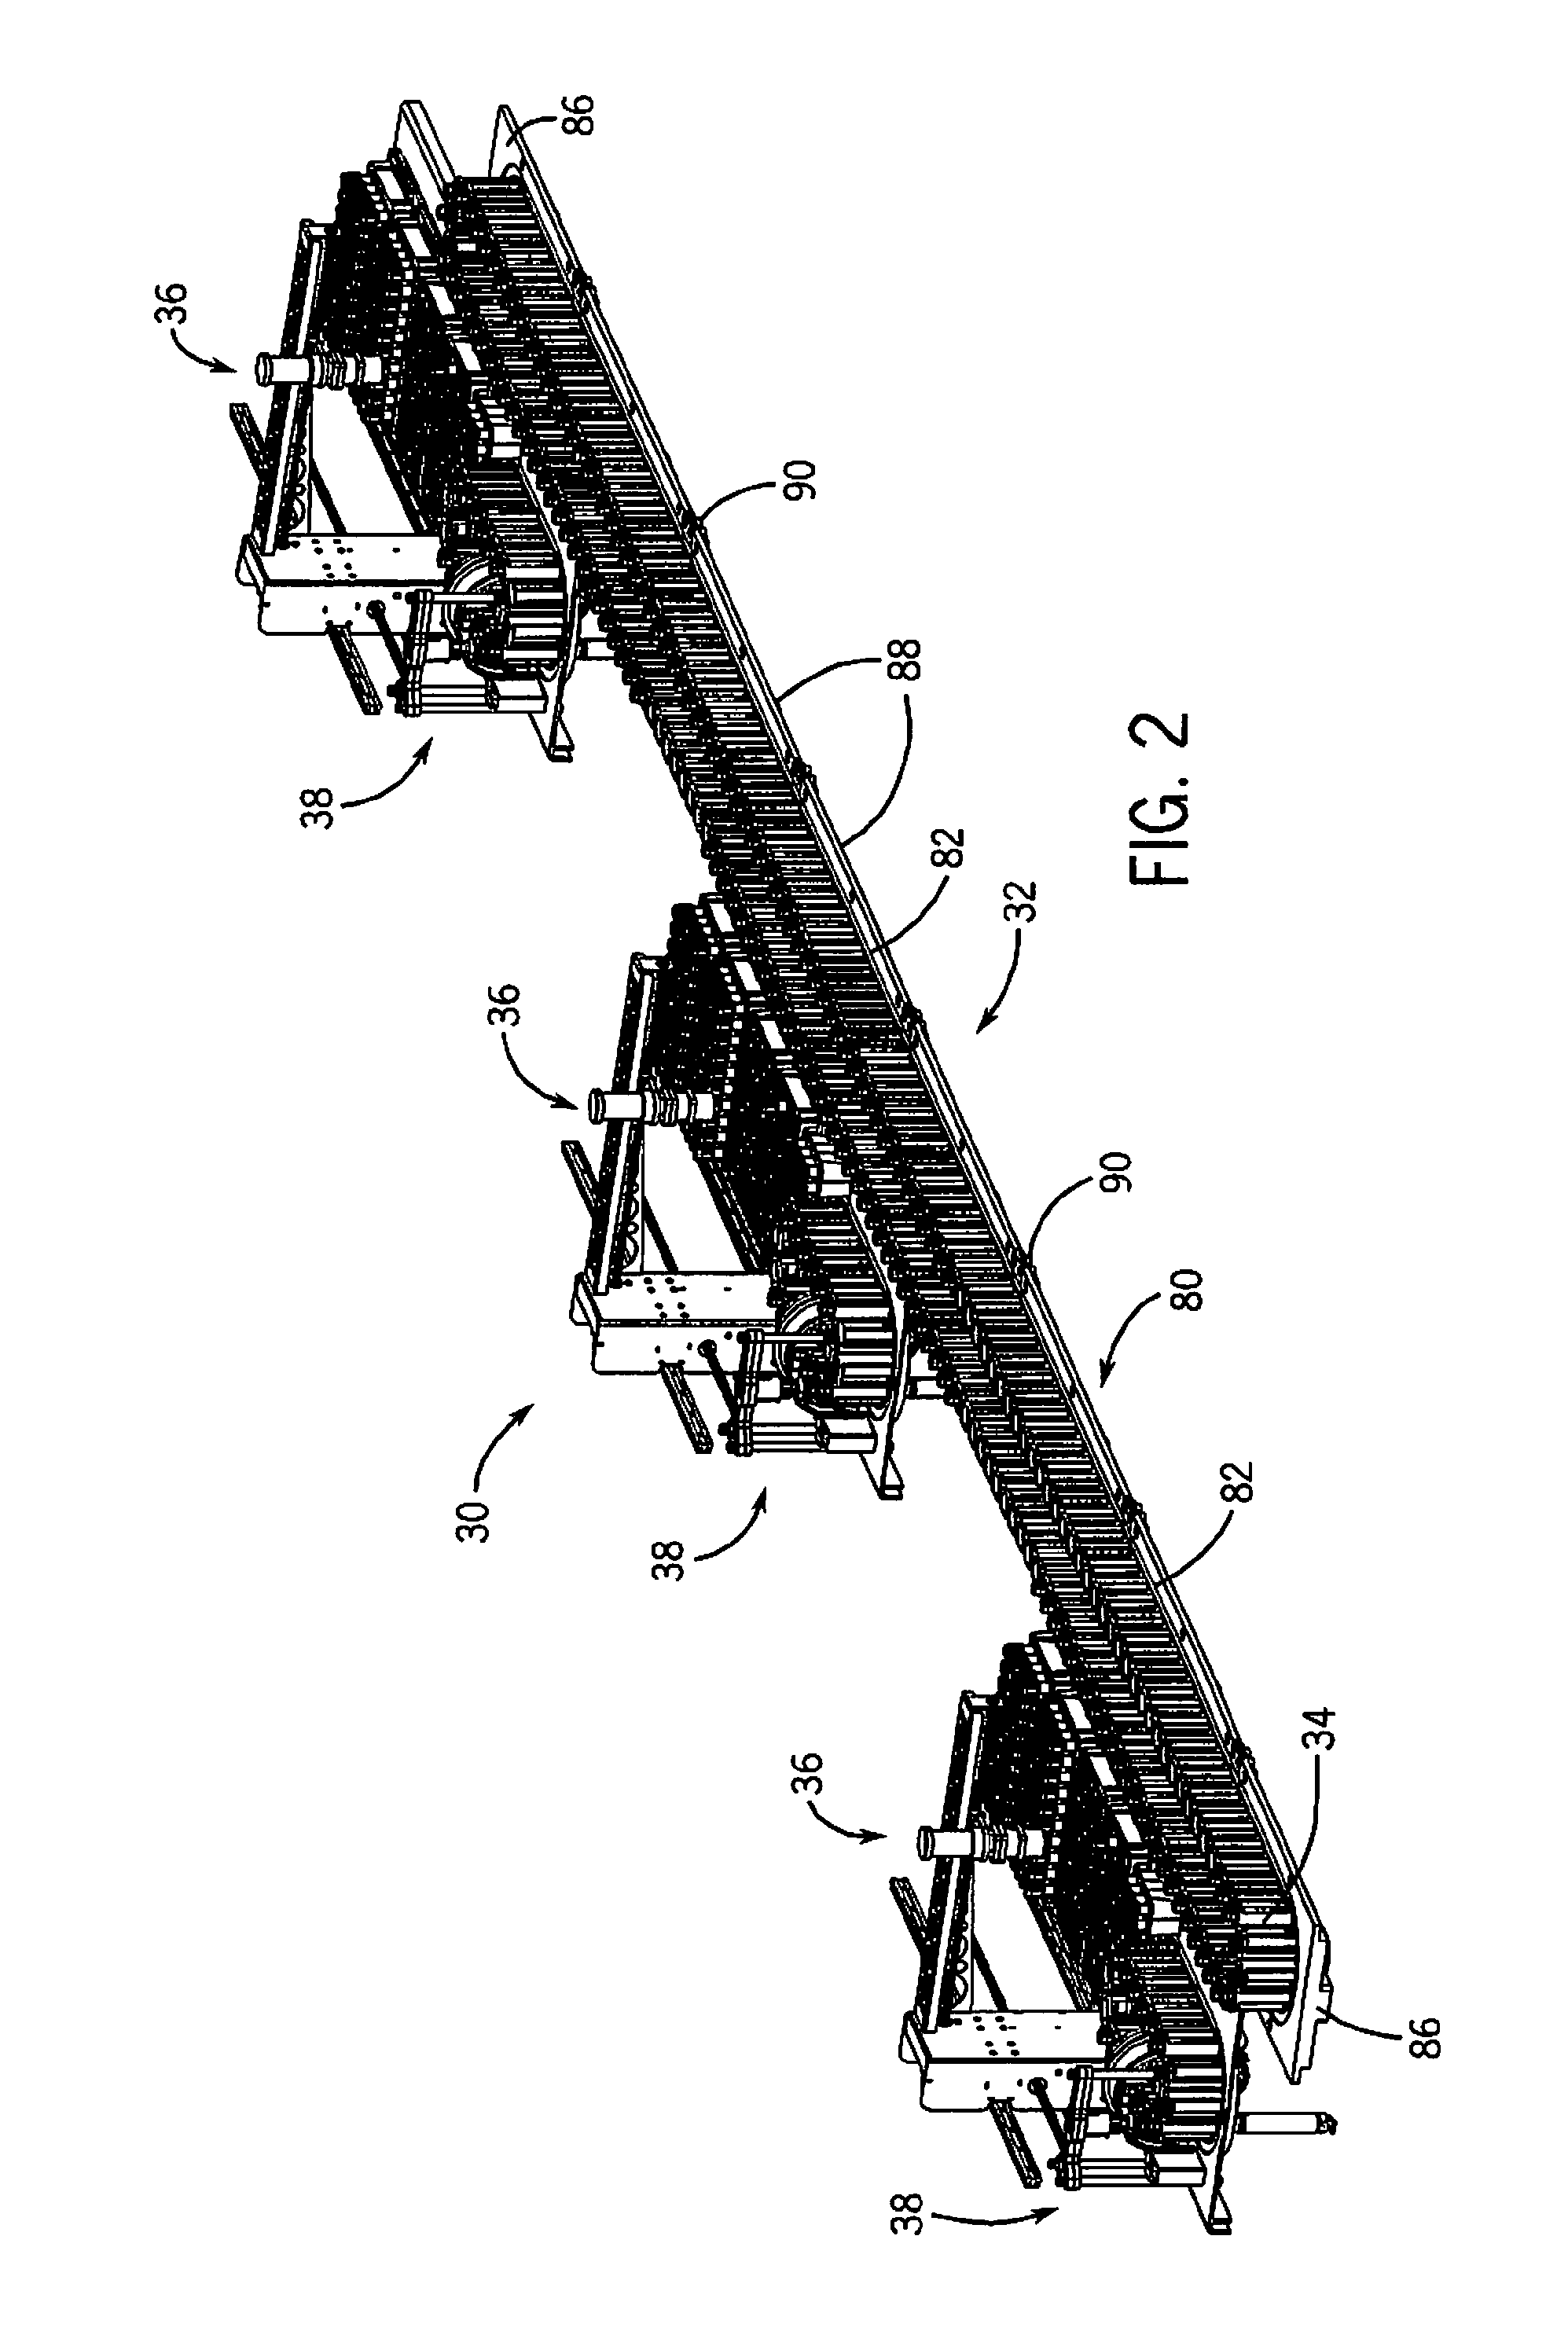 Automatic loading of sample tubes for clinical analyzer